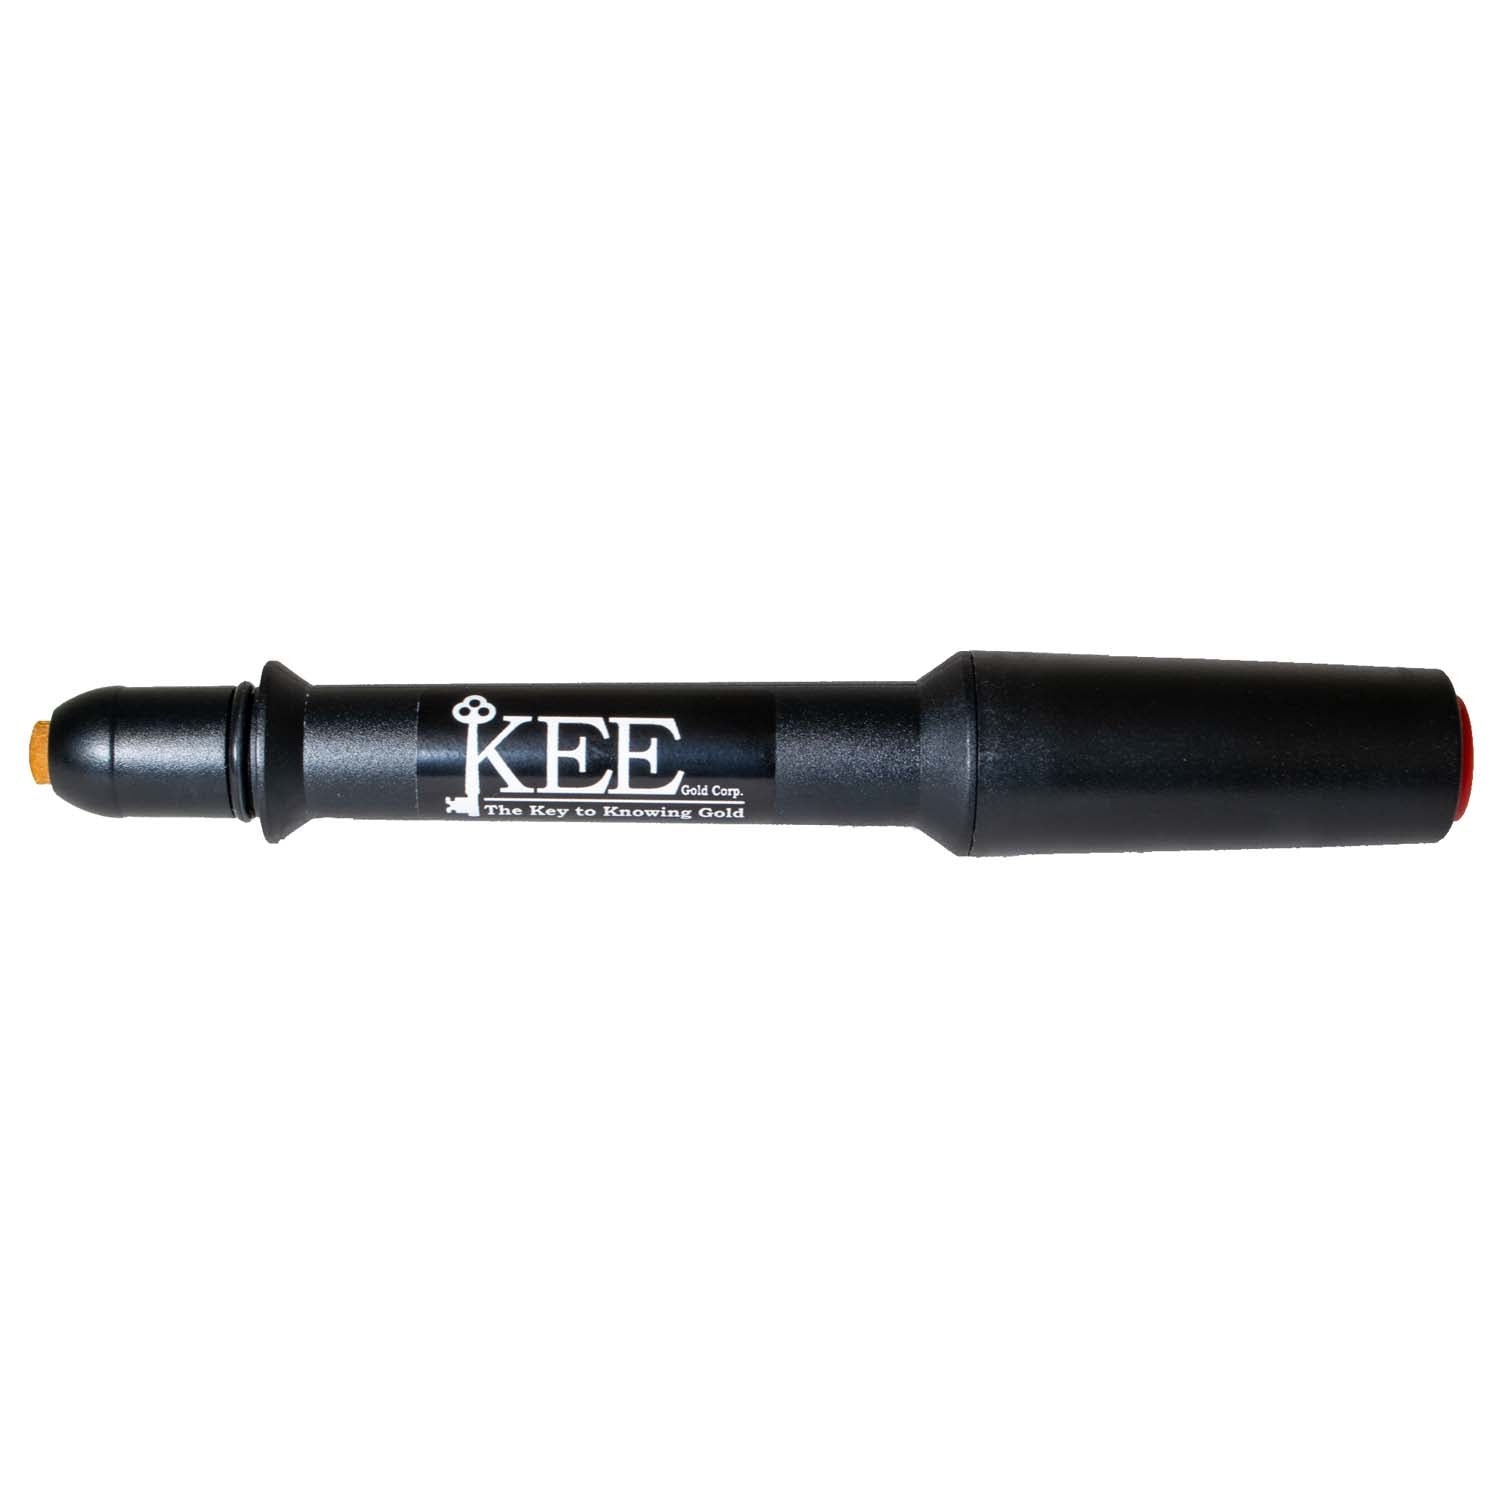 Replacement pen-probe for Kee gold tester